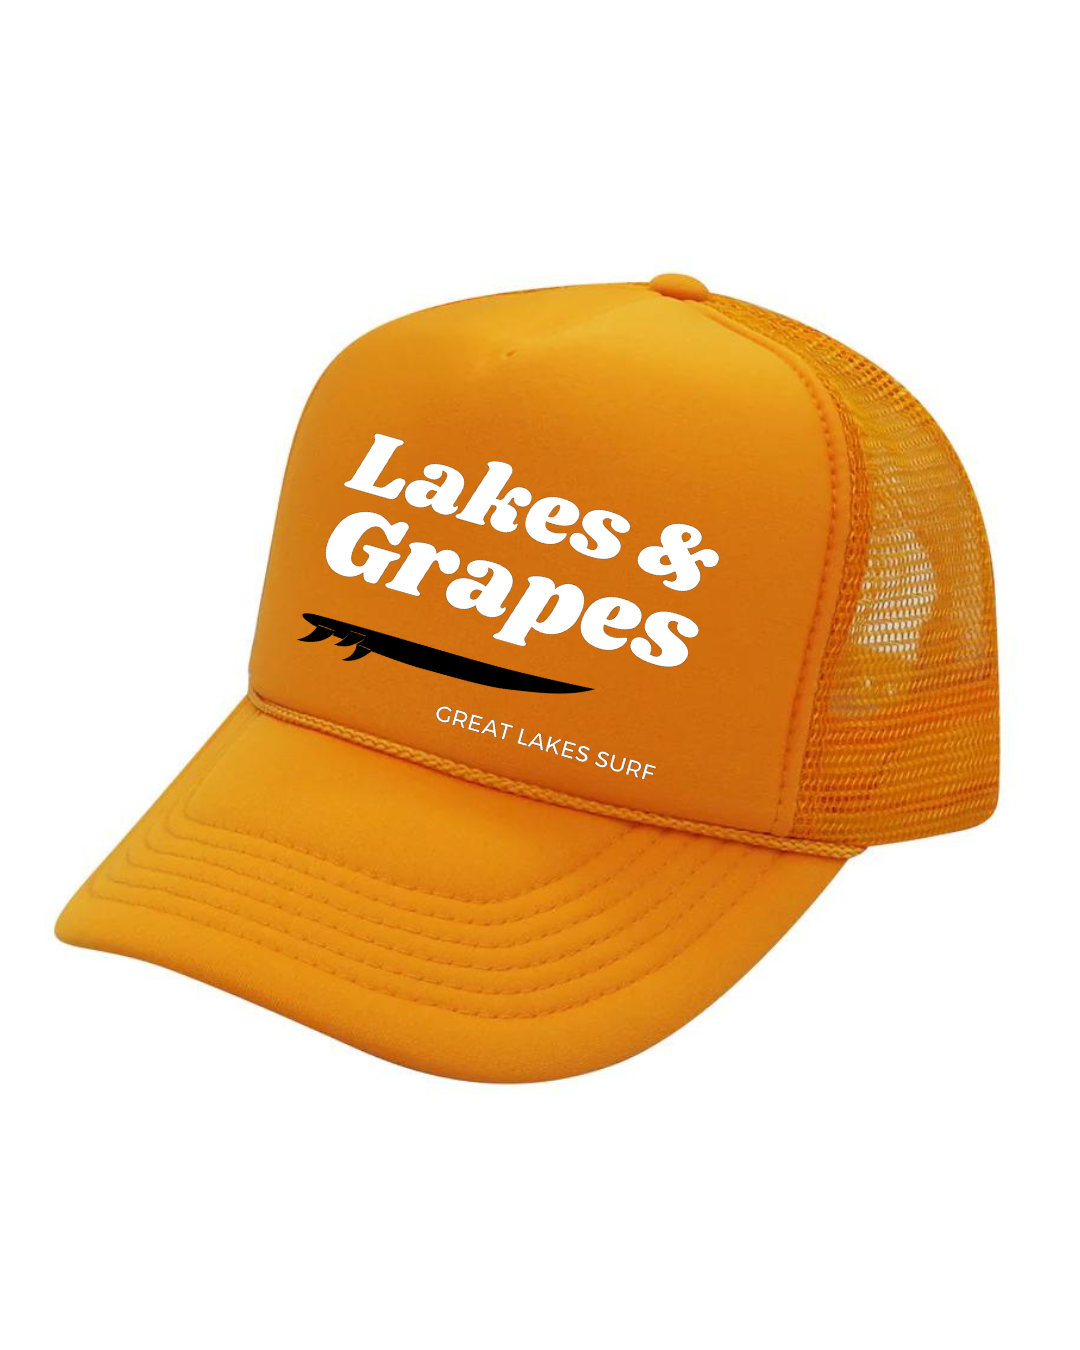 In this image, we see a Lakes and Grapes Gold Great Lakes Surf Trucker Hat. Experience comfort and style as you embrace the spirit of the Great Lakes.